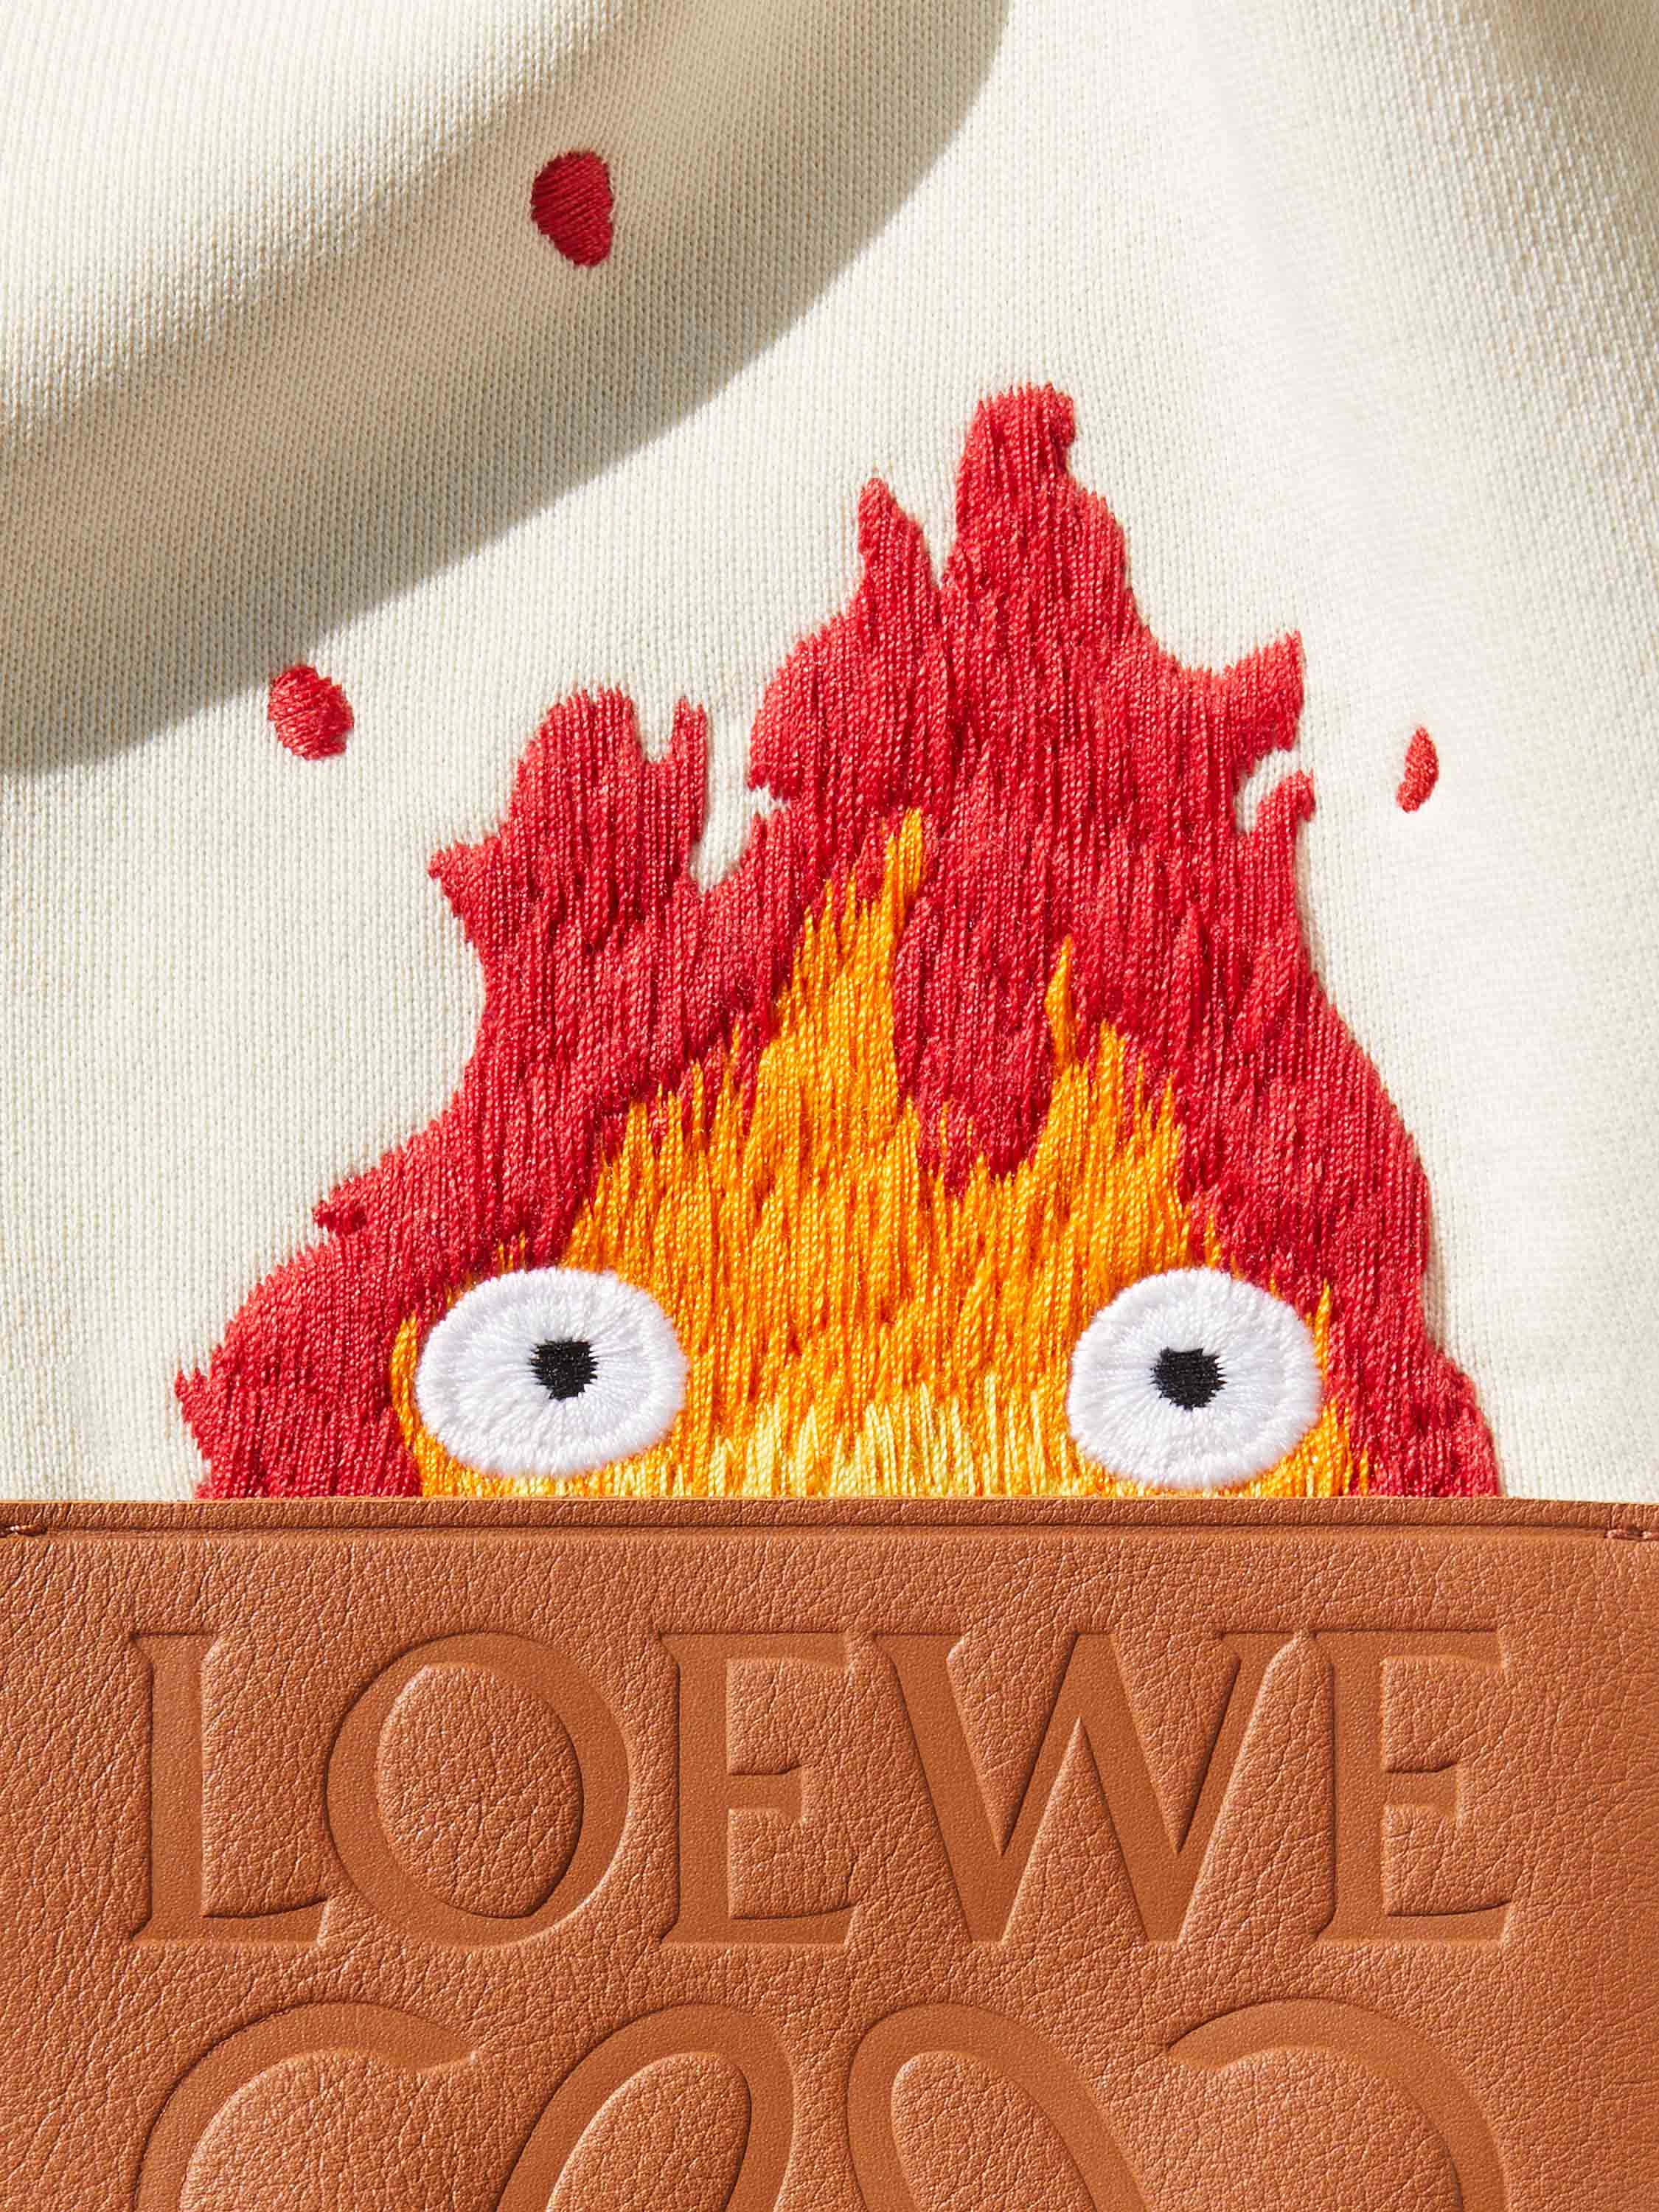 LOEWE | Reinventing craft and leather